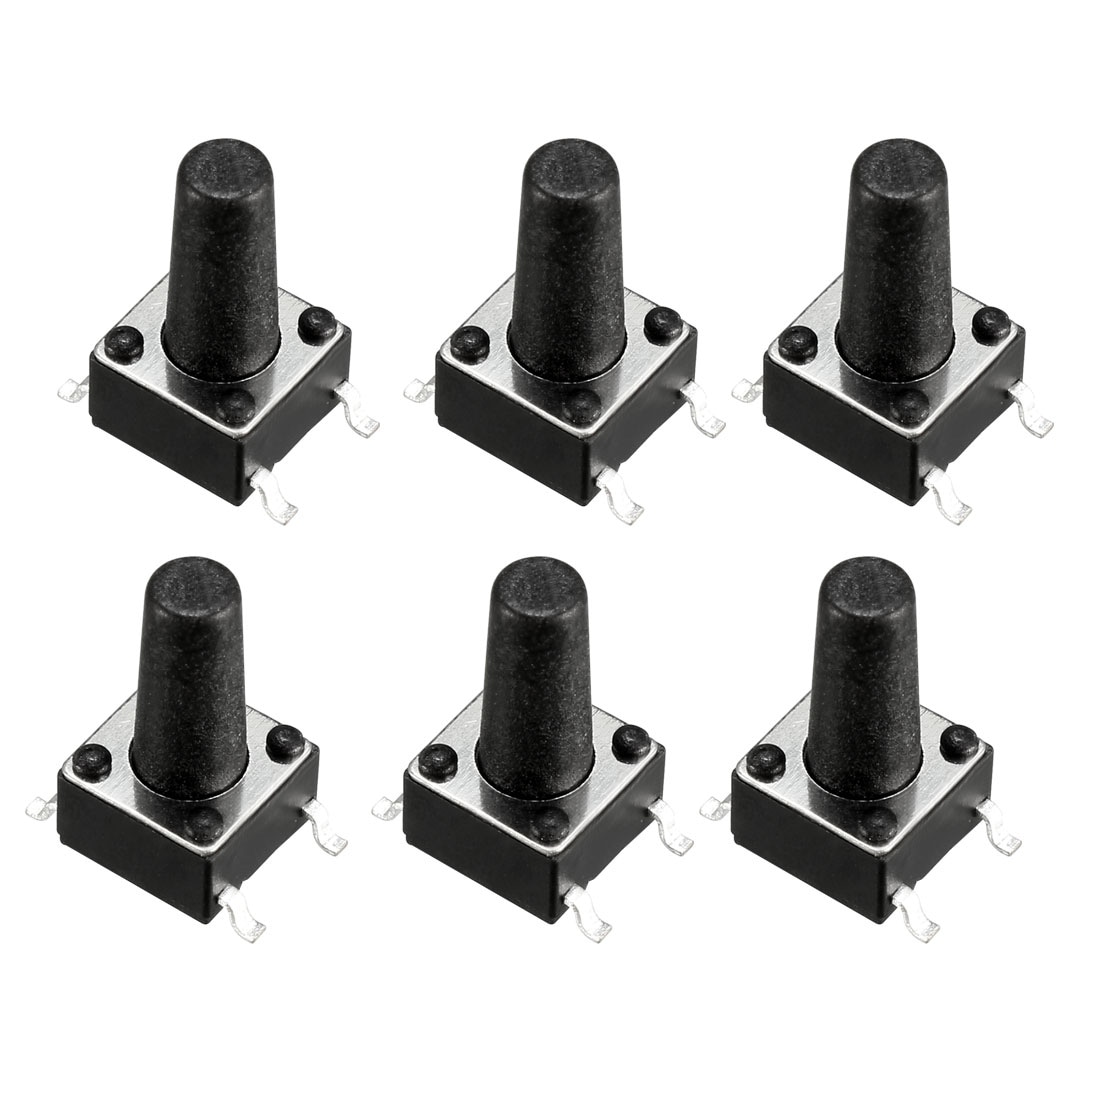 50x Momentary Tactile Tact Touch Push Button Switch 4 Pin SMT SMD 4.5x4.5x3.8mm